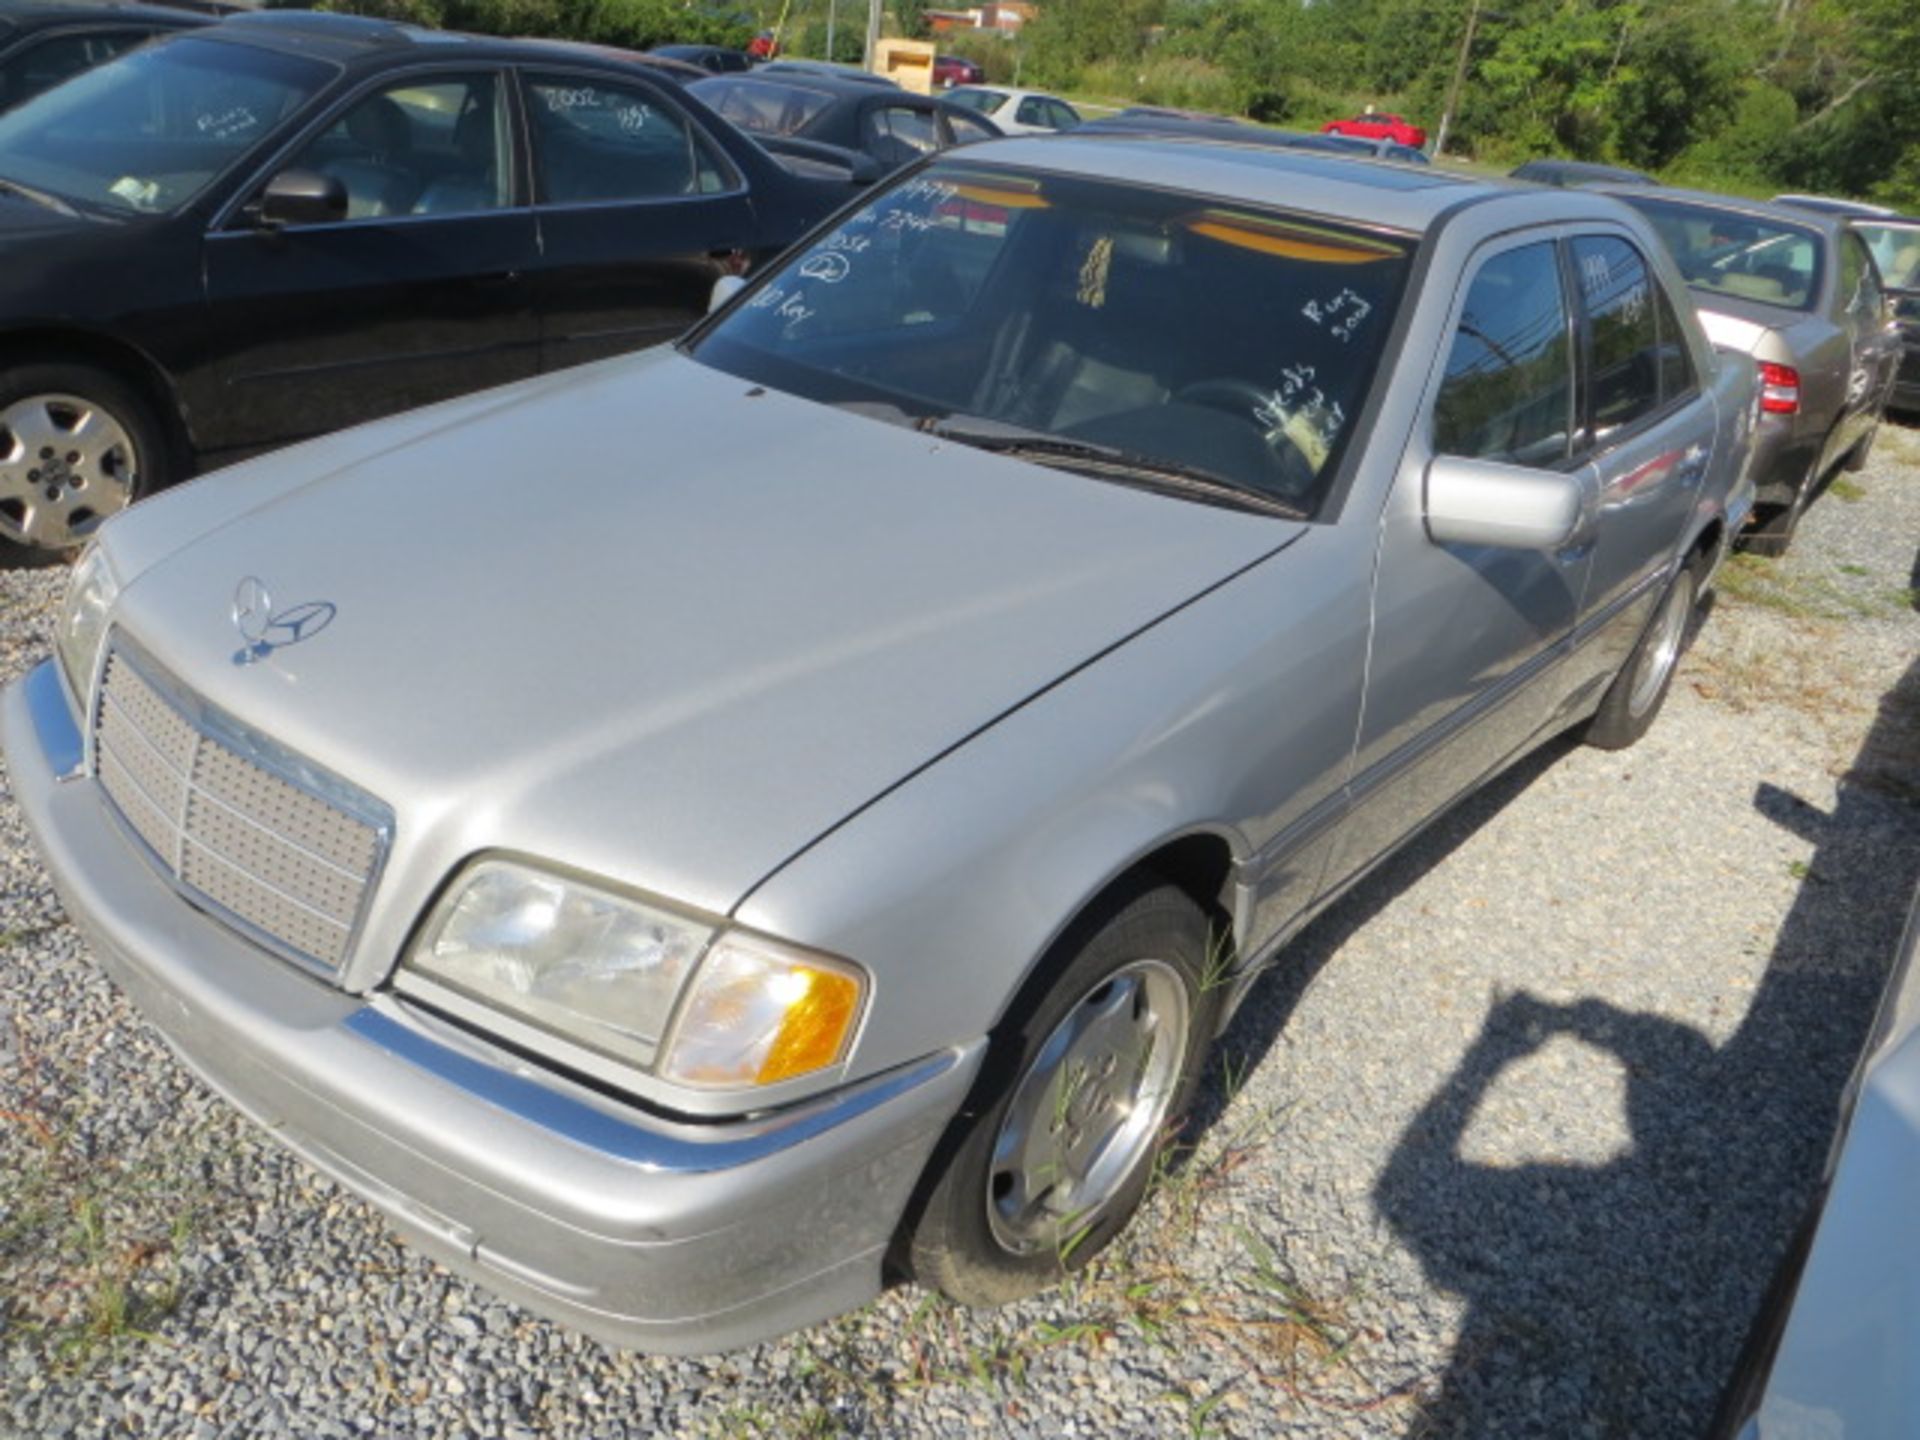 1999 Mercedes Benz C28-238000 MILES,VIN WDBHA29G5XA797344, SOLD WITH GOOD TRANSFERABLE TITLE, NO KEY - Image 2 of 3